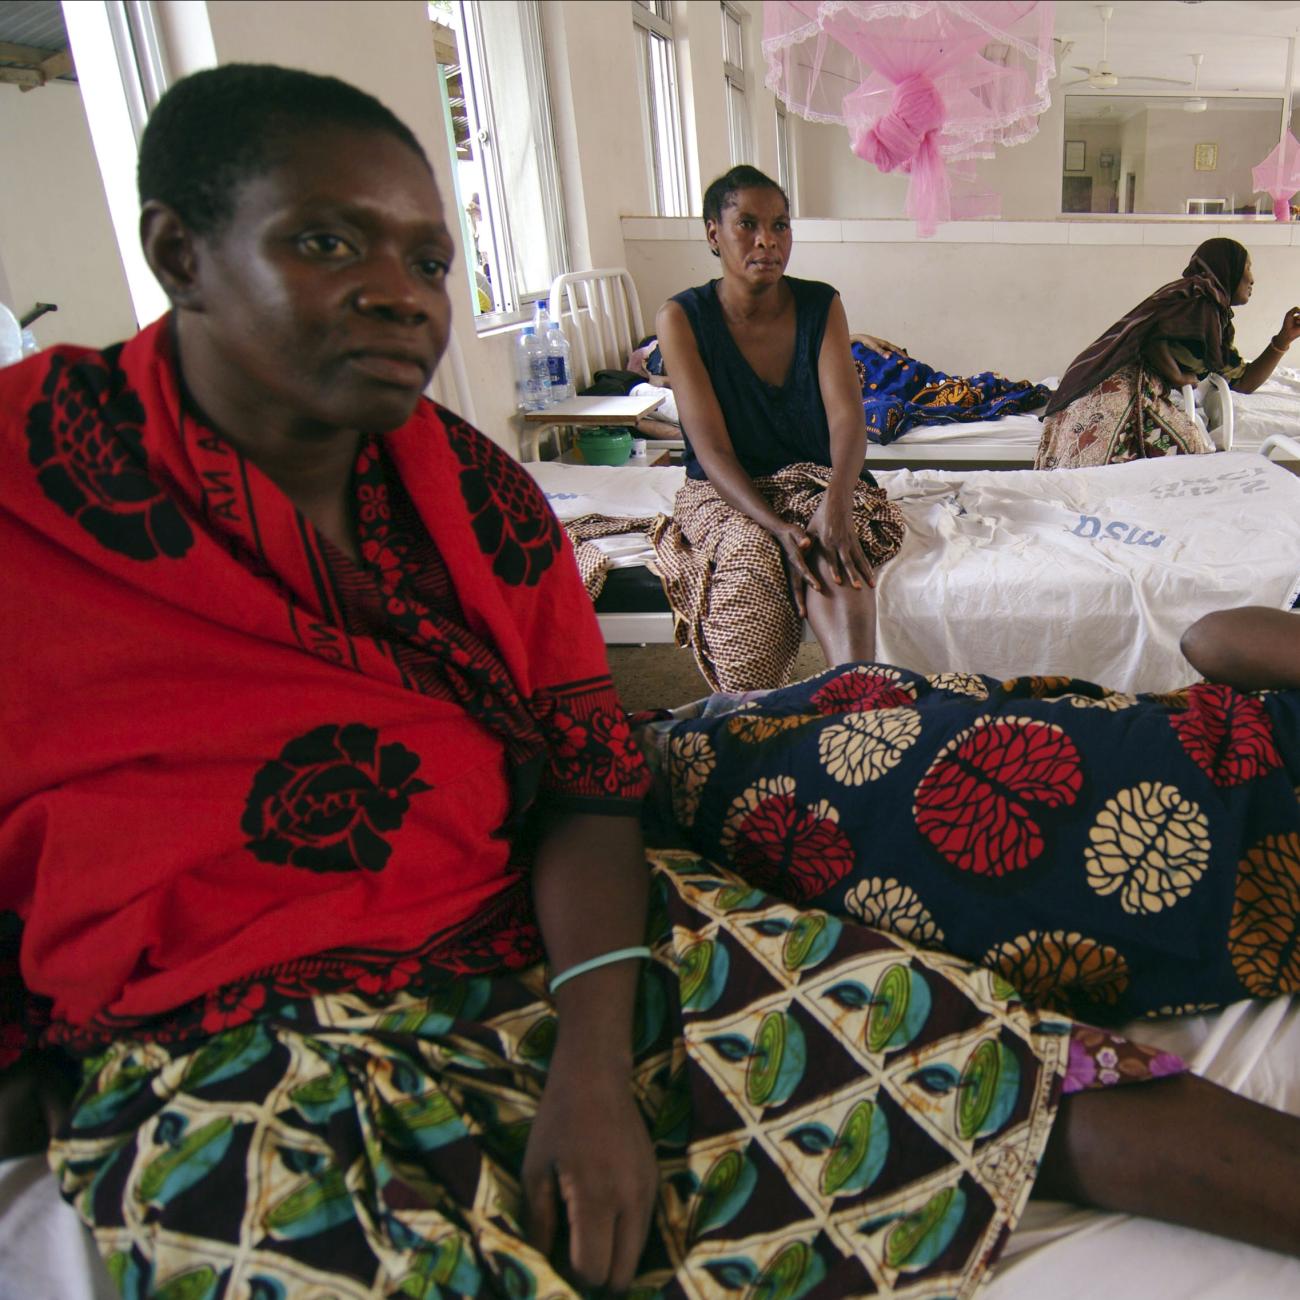 Rukia Kondogoza, a cervical cancer patient, shares a bed in a female ward of a cancer institute in the capital Dar es Salaam, Tanzania, on November 11, 2009. 